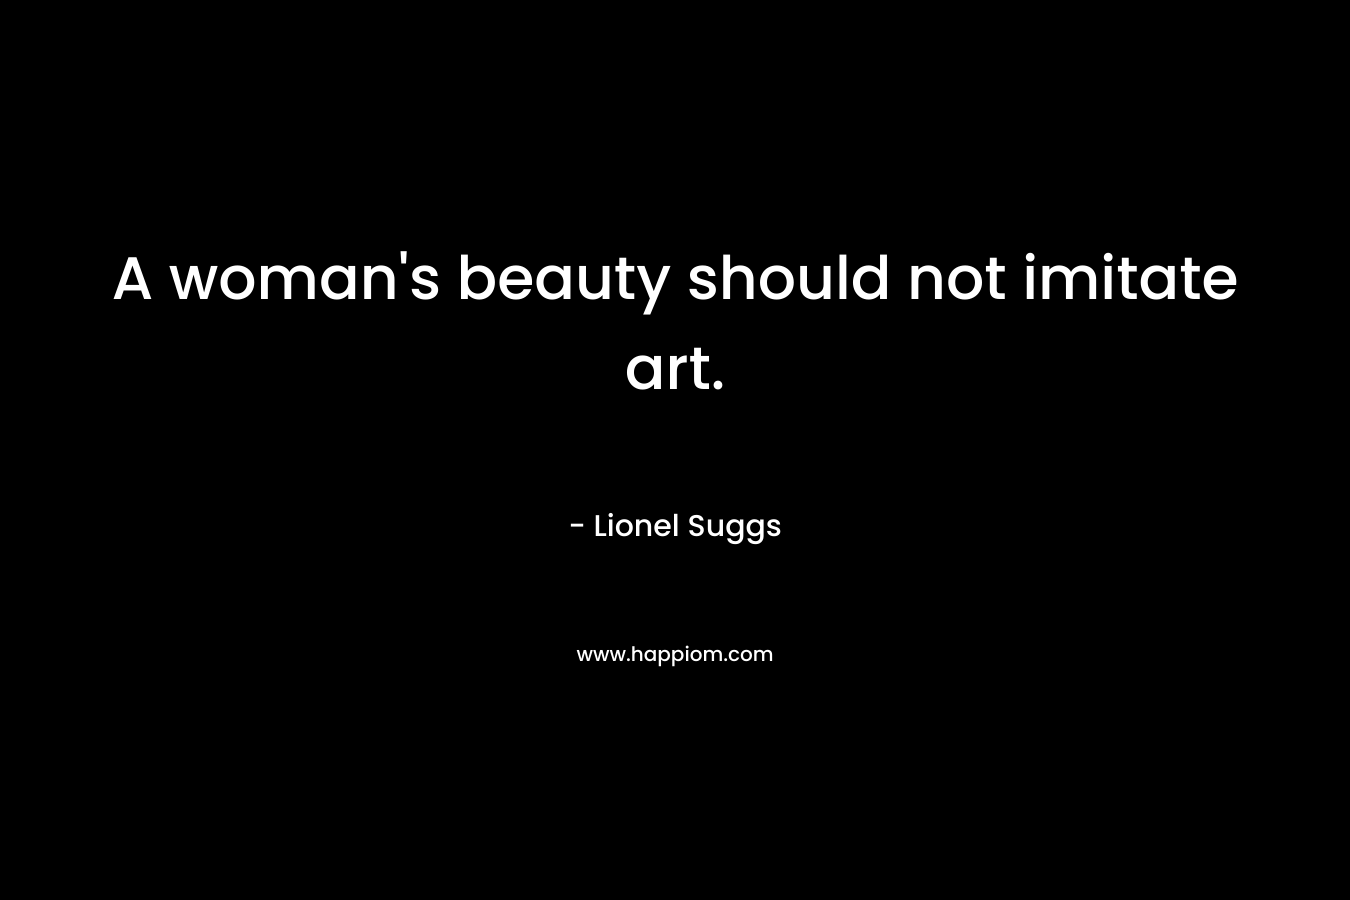 A woman’s beauty should not imitate art. – Lionel Suggs